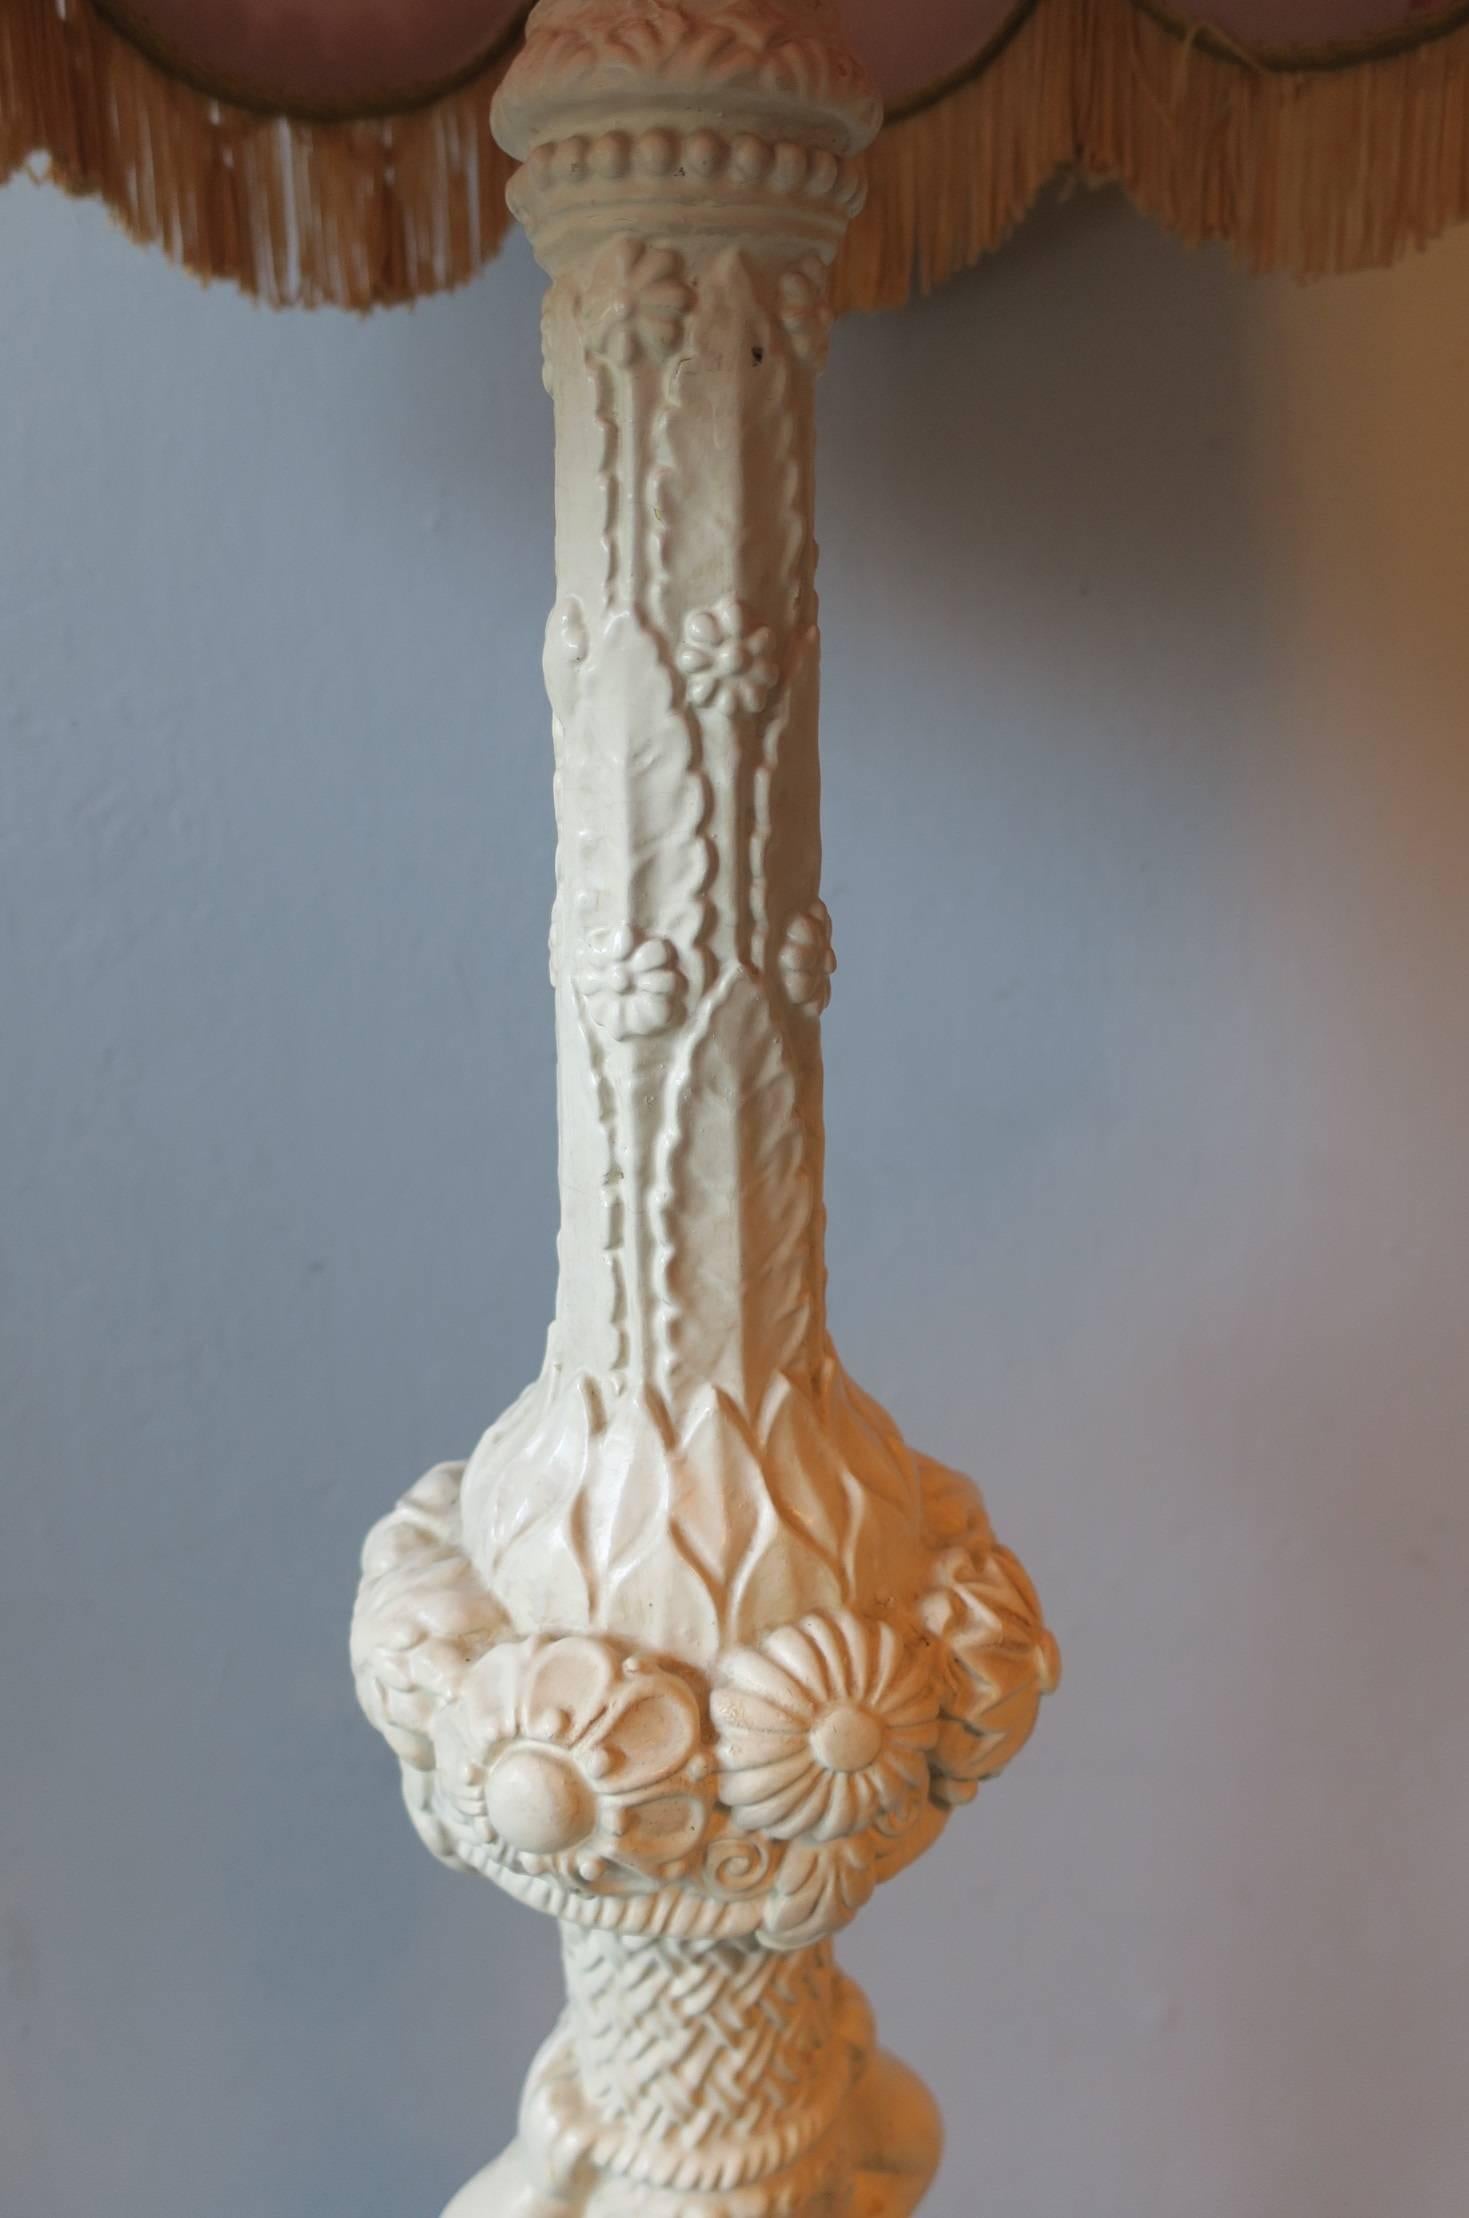 Carved and painted wood floor lamp with a putto carrying the light, original silk shade and finial.

Measures: Height 75 ins (190 cm).
Diameter of the foot 15 ins (38 cm).
Diameter of the shade 24 ins (60 cm).
       